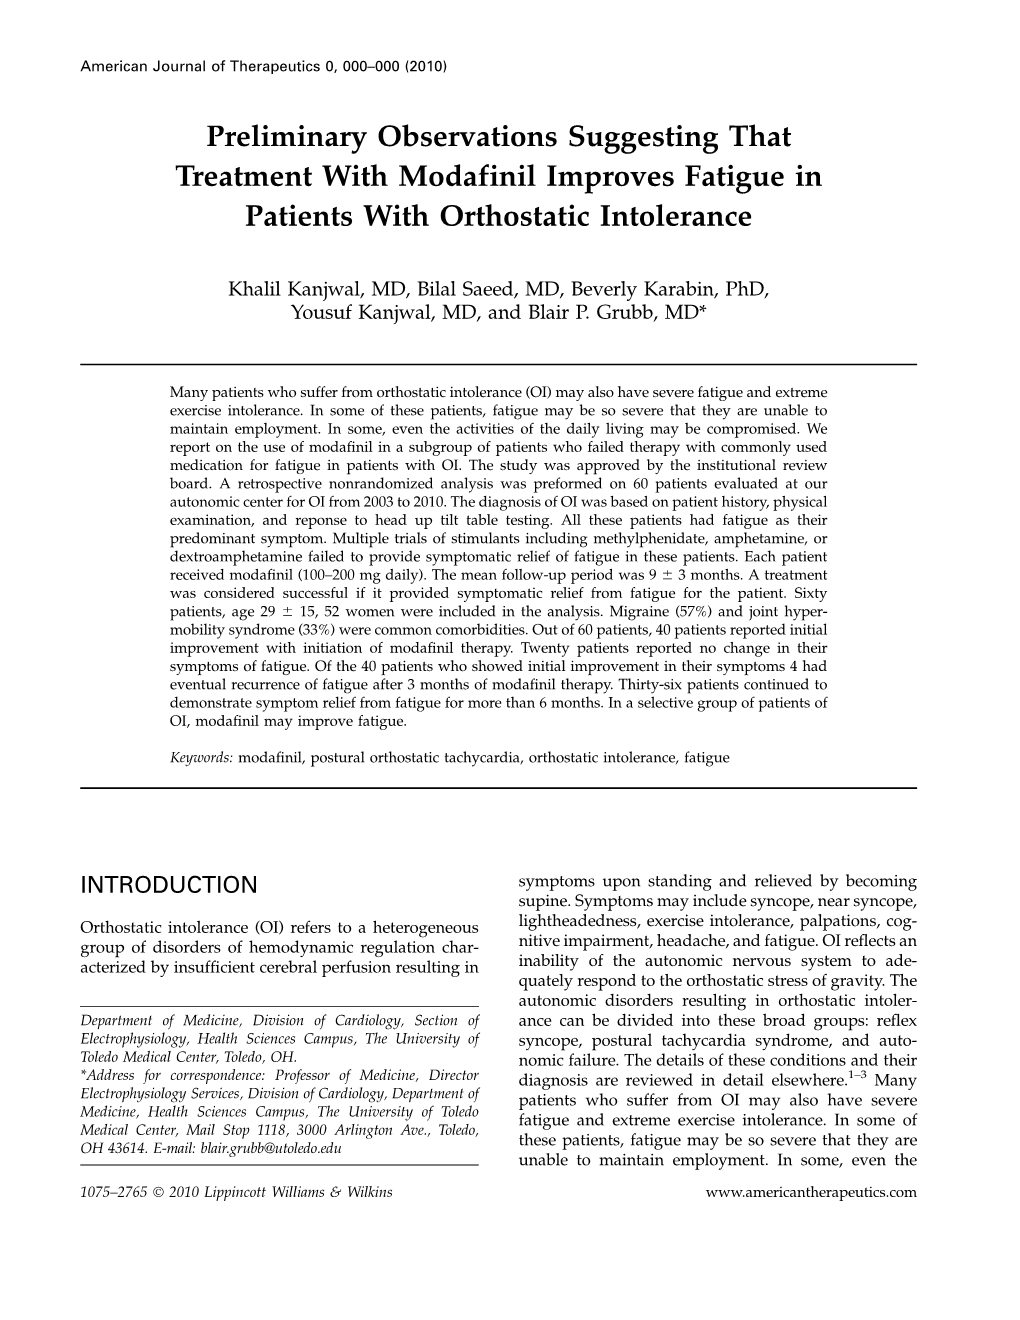 Preliminary Observations Suggesting That Treatment with Modafinil Improves Fatigue in Patients with Orthostatic Intolerance